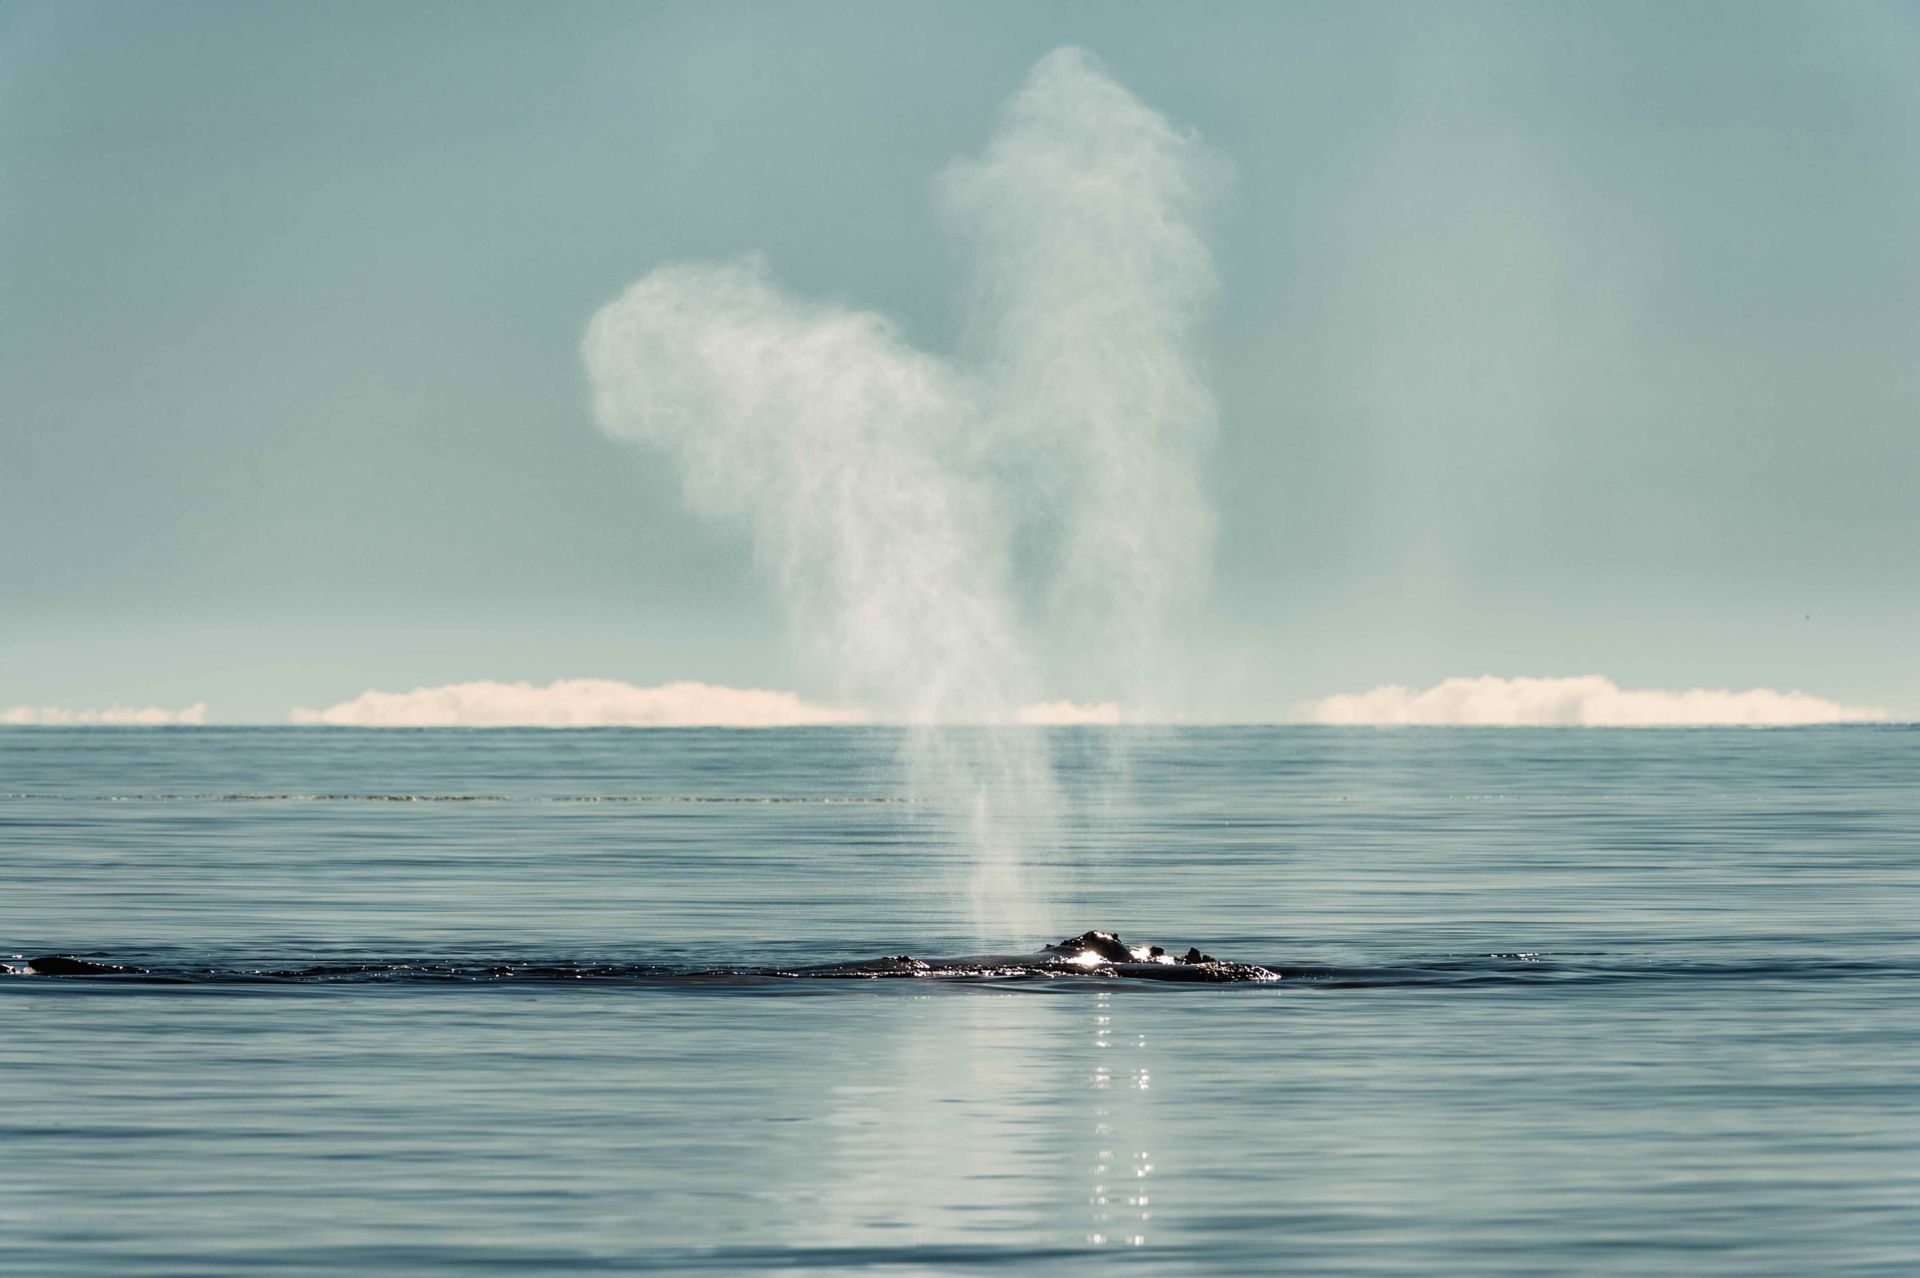 The unique v-shaped blow of a North Atlantic right whale (Eubalaena glacialis), one of the rarest of all marine mammal species. Bay of Fundy, Canada.